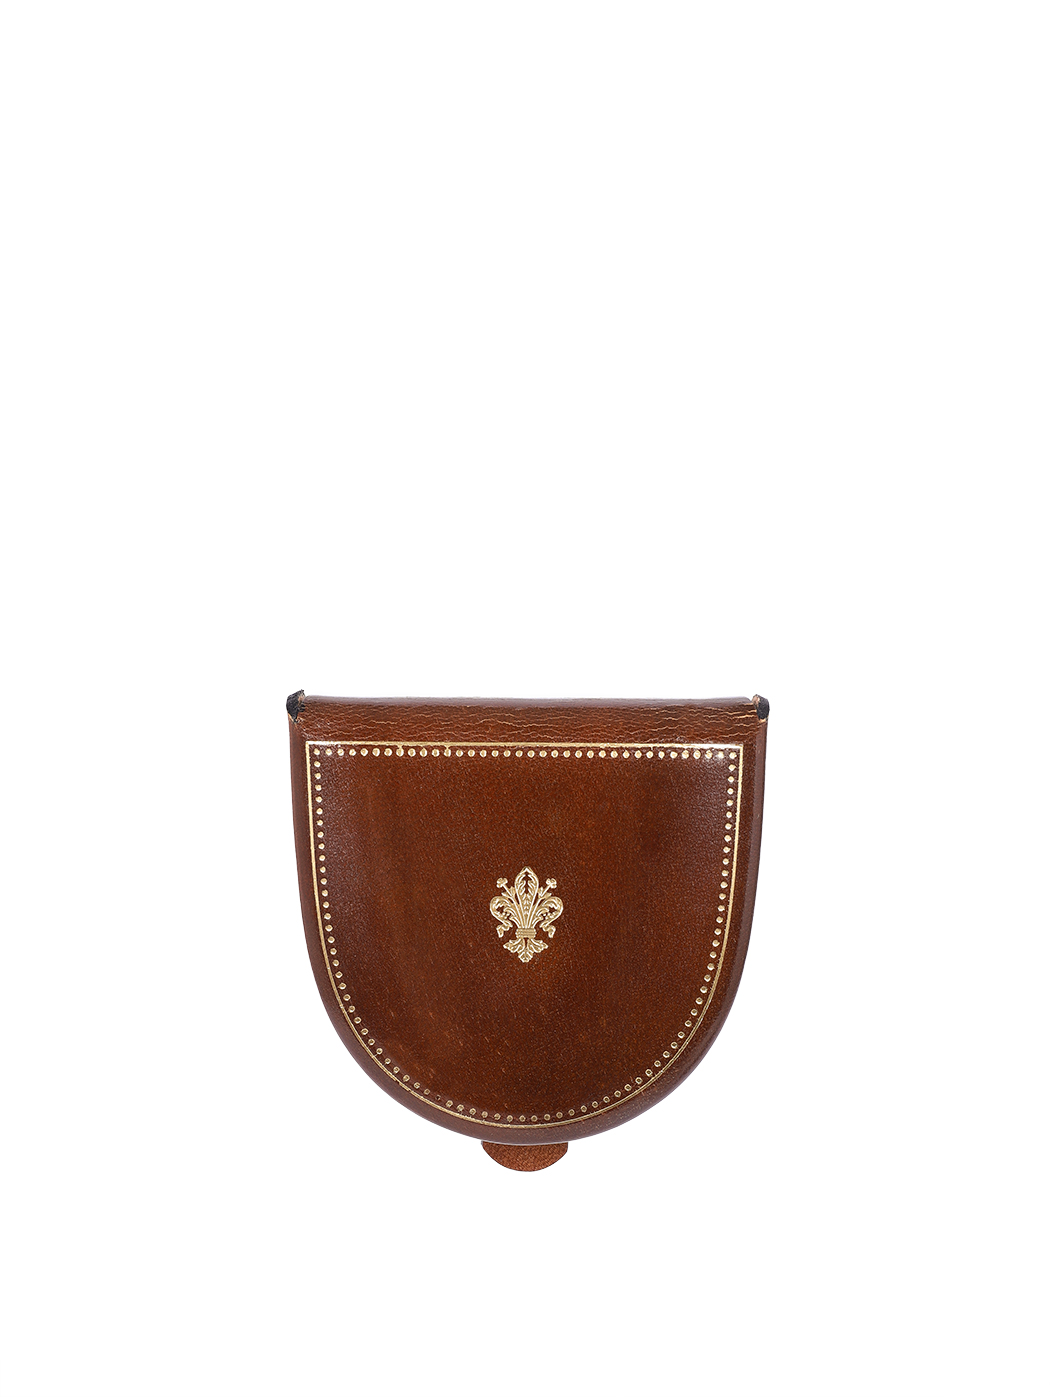 Florentine Lily Tacco Coin Pouch Brown